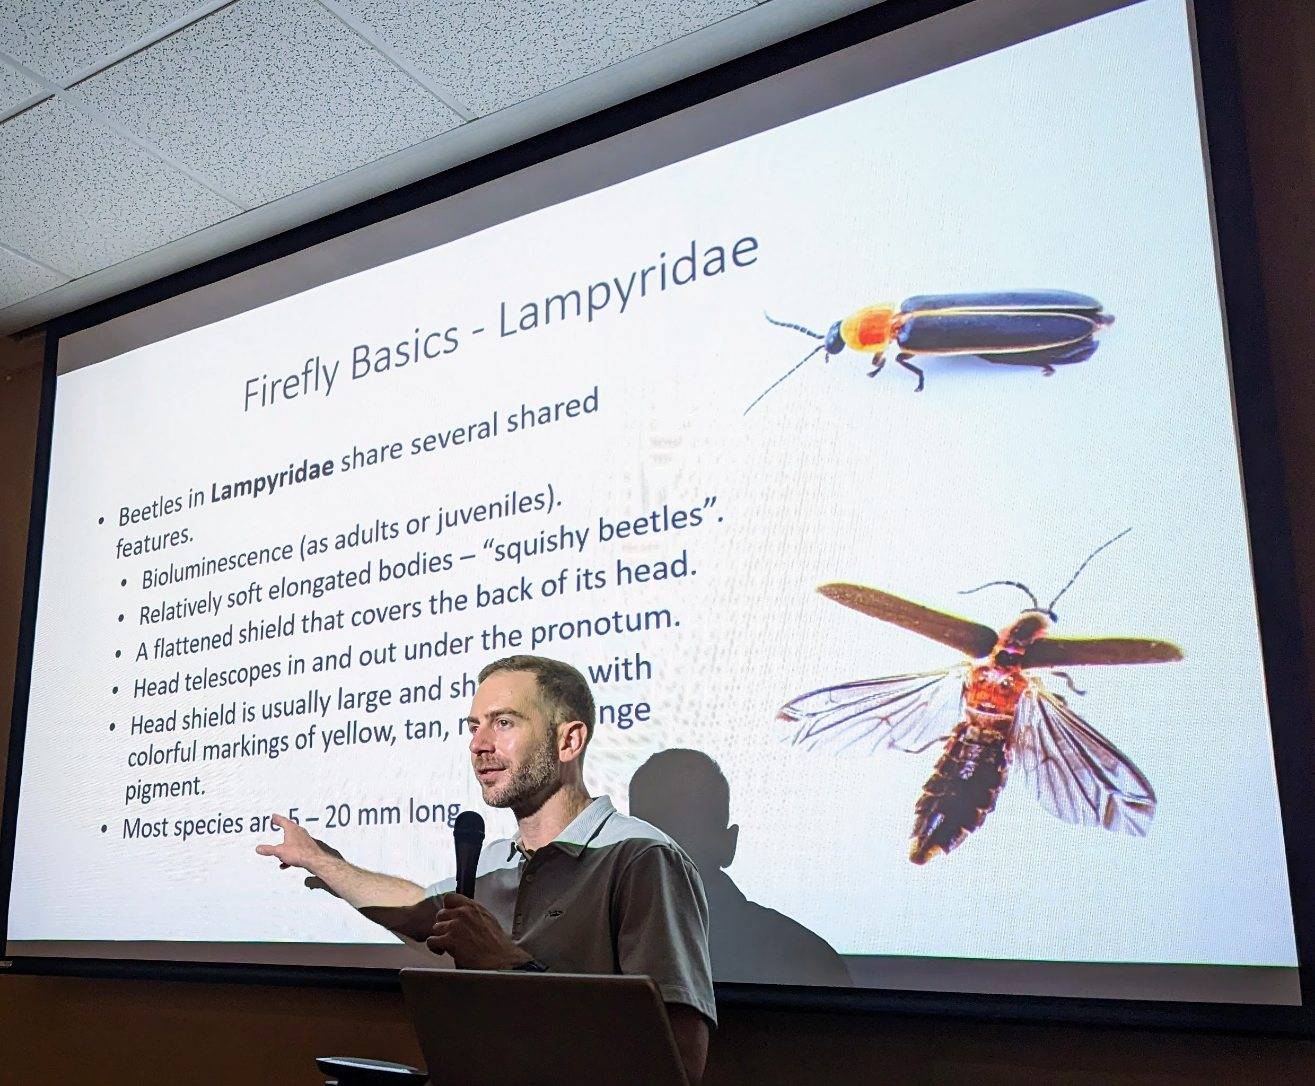 man standing in front of large presentation on fireflies